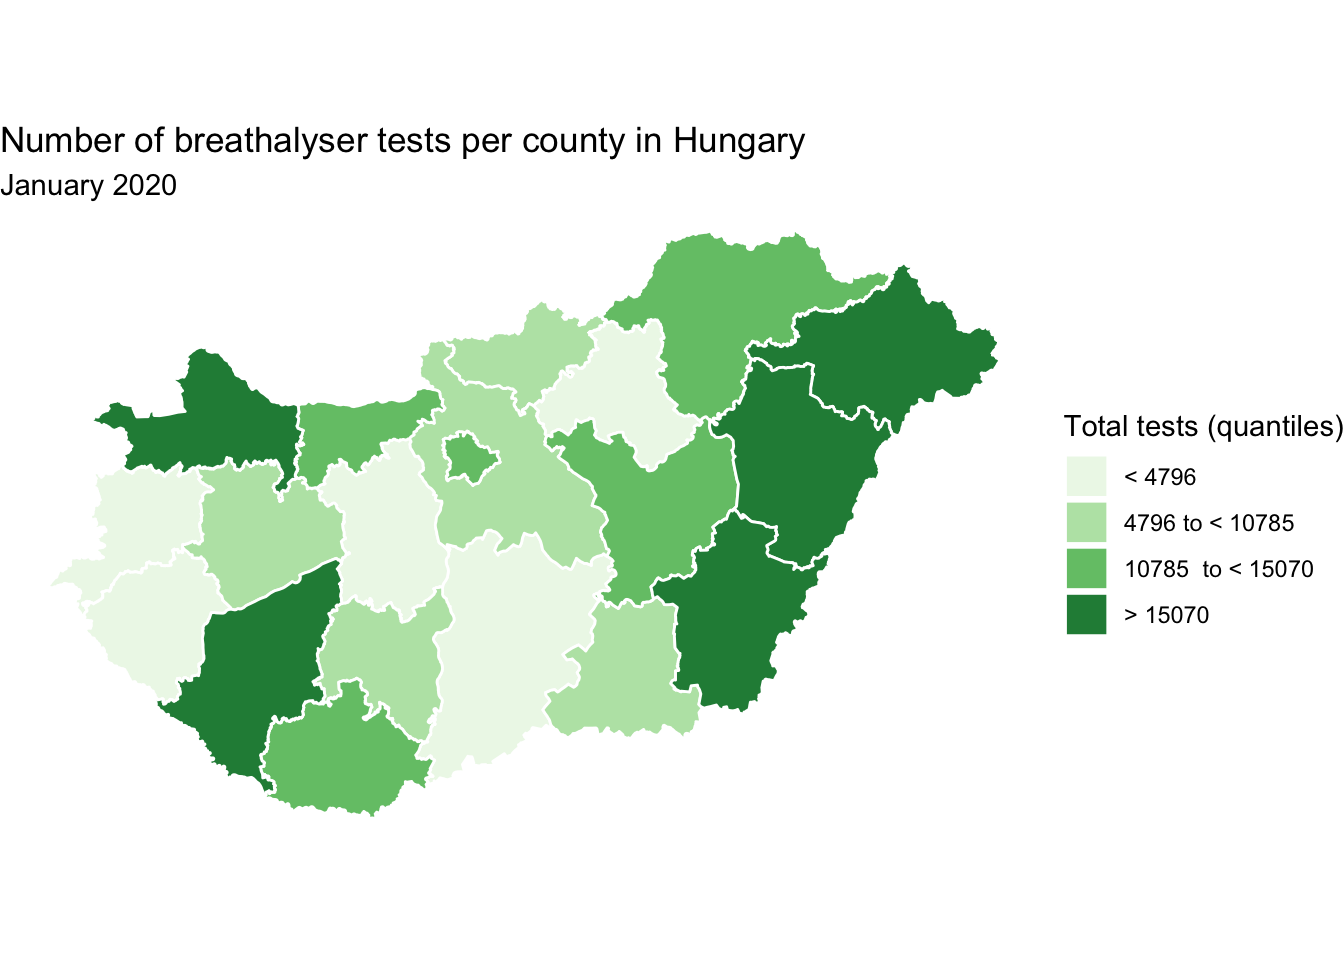 Further changes to the same map of Hungary, the ranges next to the colours now use the connecting word 'to', and 'less than' and 'greater than' signs where needed.